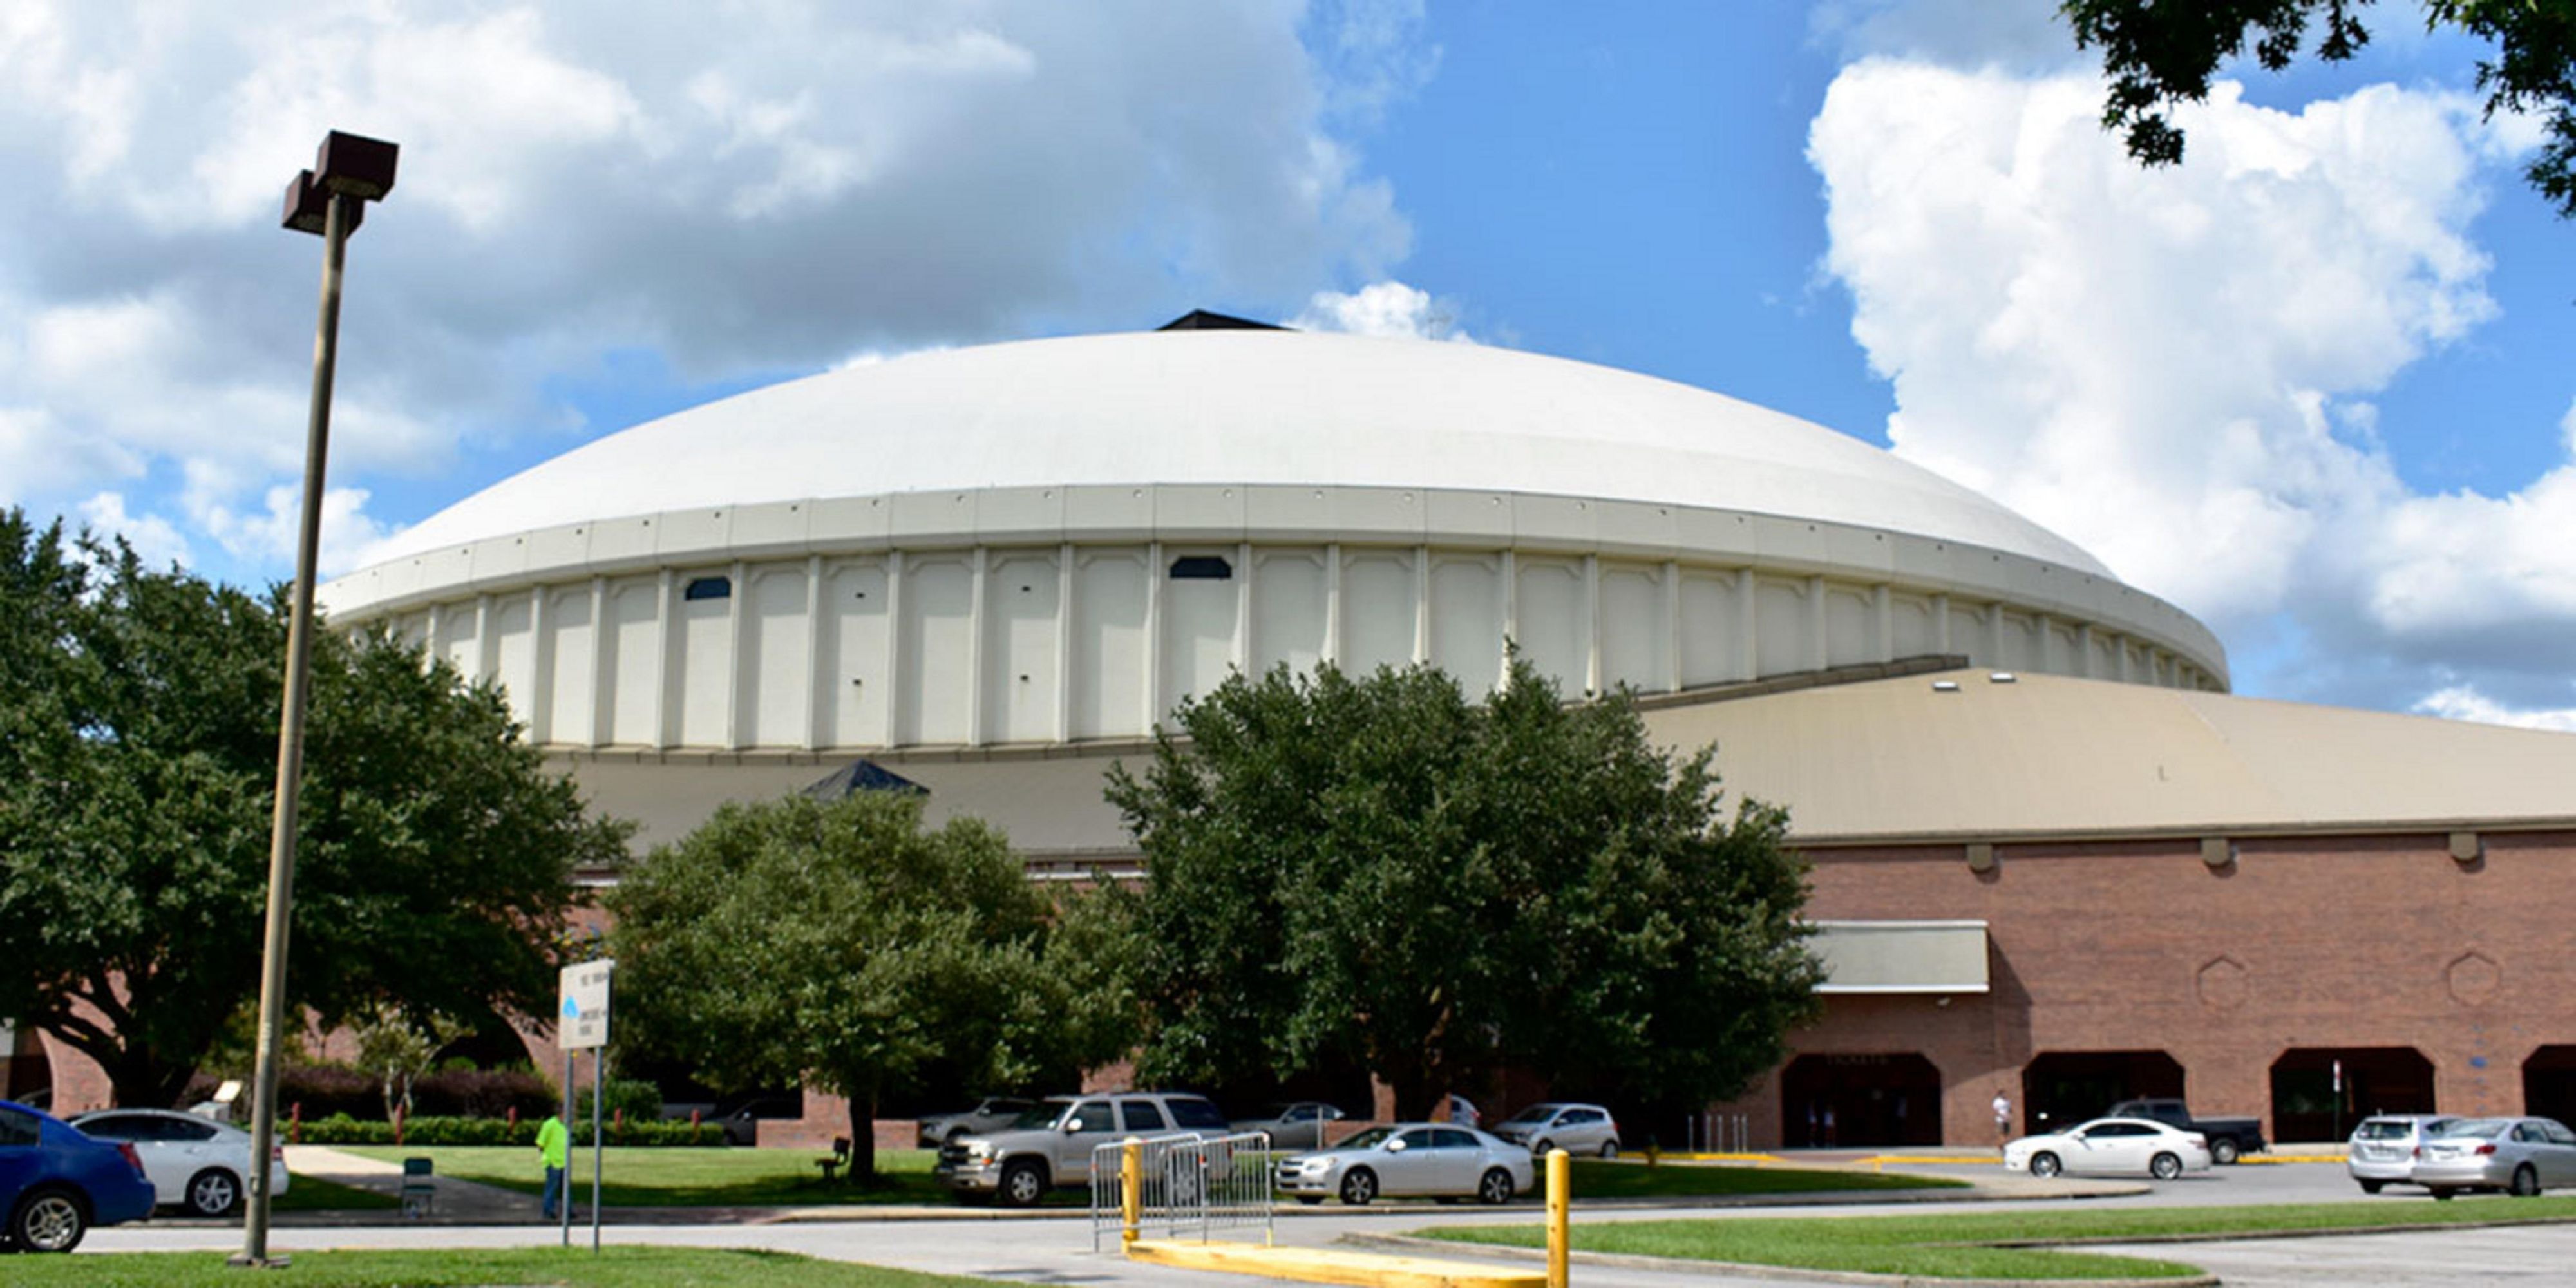 Home to the Rajun Cajuns! This multi-purpose facility hosts a variety of events for the Lafayette area. Concerts, family shows, sporting events, conventions and graduations all take place here. Conveniently located and just a short drive to this facility.